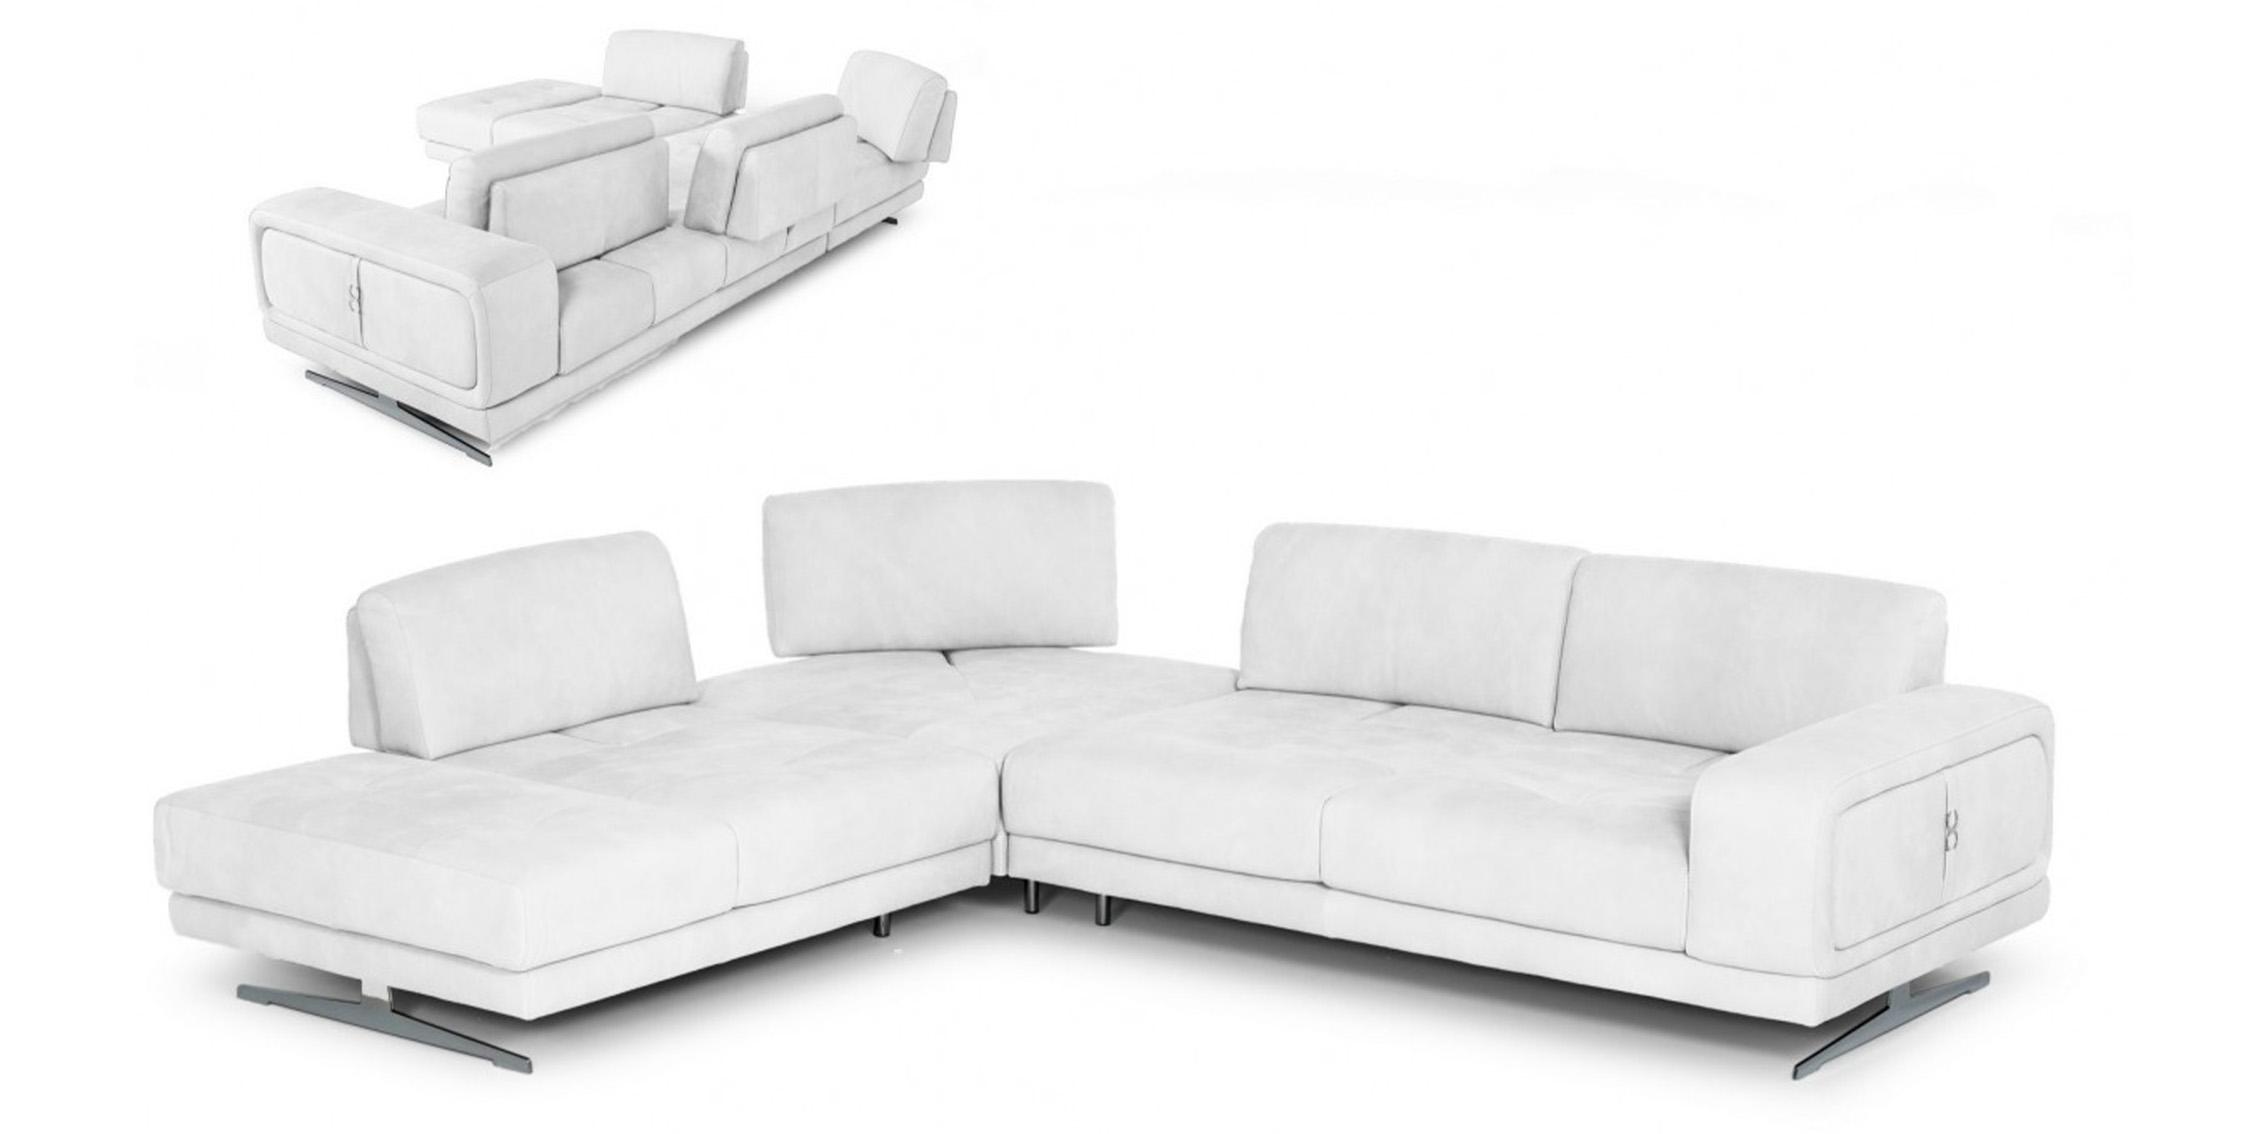 Contemporary, Modern Sectional Sofa VGCCMOOD-SPAZIO-100-WHT-LAF-SECT 79192 VGCCMOOD-SPAZIO-100-WHT-LAF-SECT in White Italian Leather